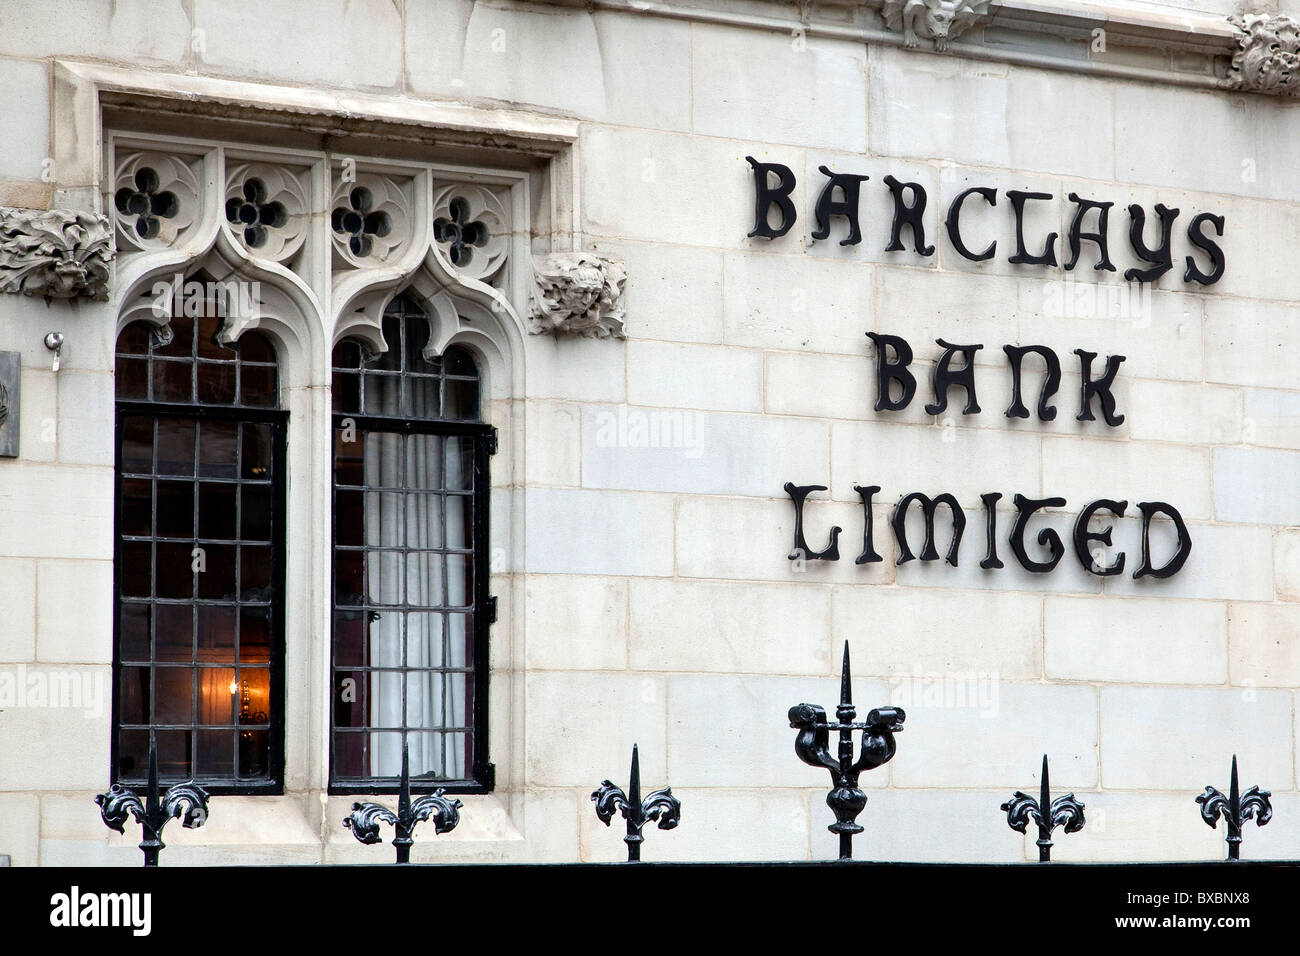 Subsidiary of the Barclays Bank in an old building in London, England, United Kingdom, Europe Stock Photo